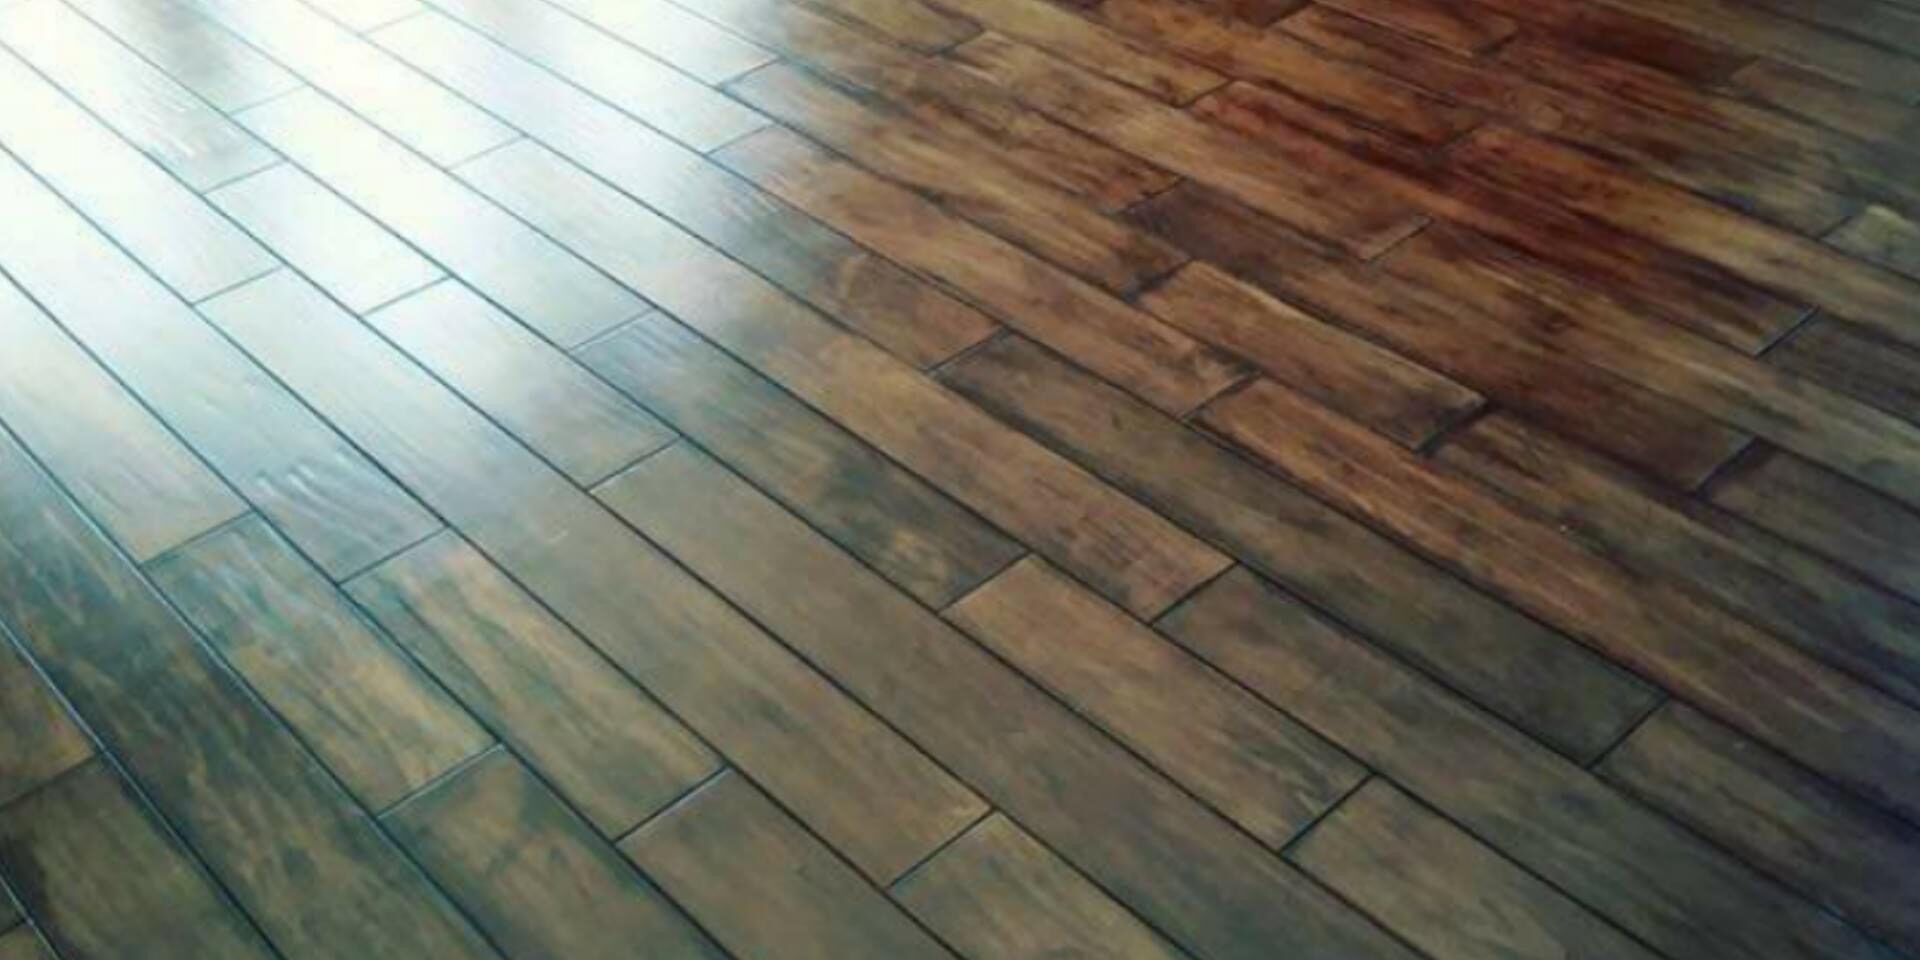 A hardwood floor with no one in it.